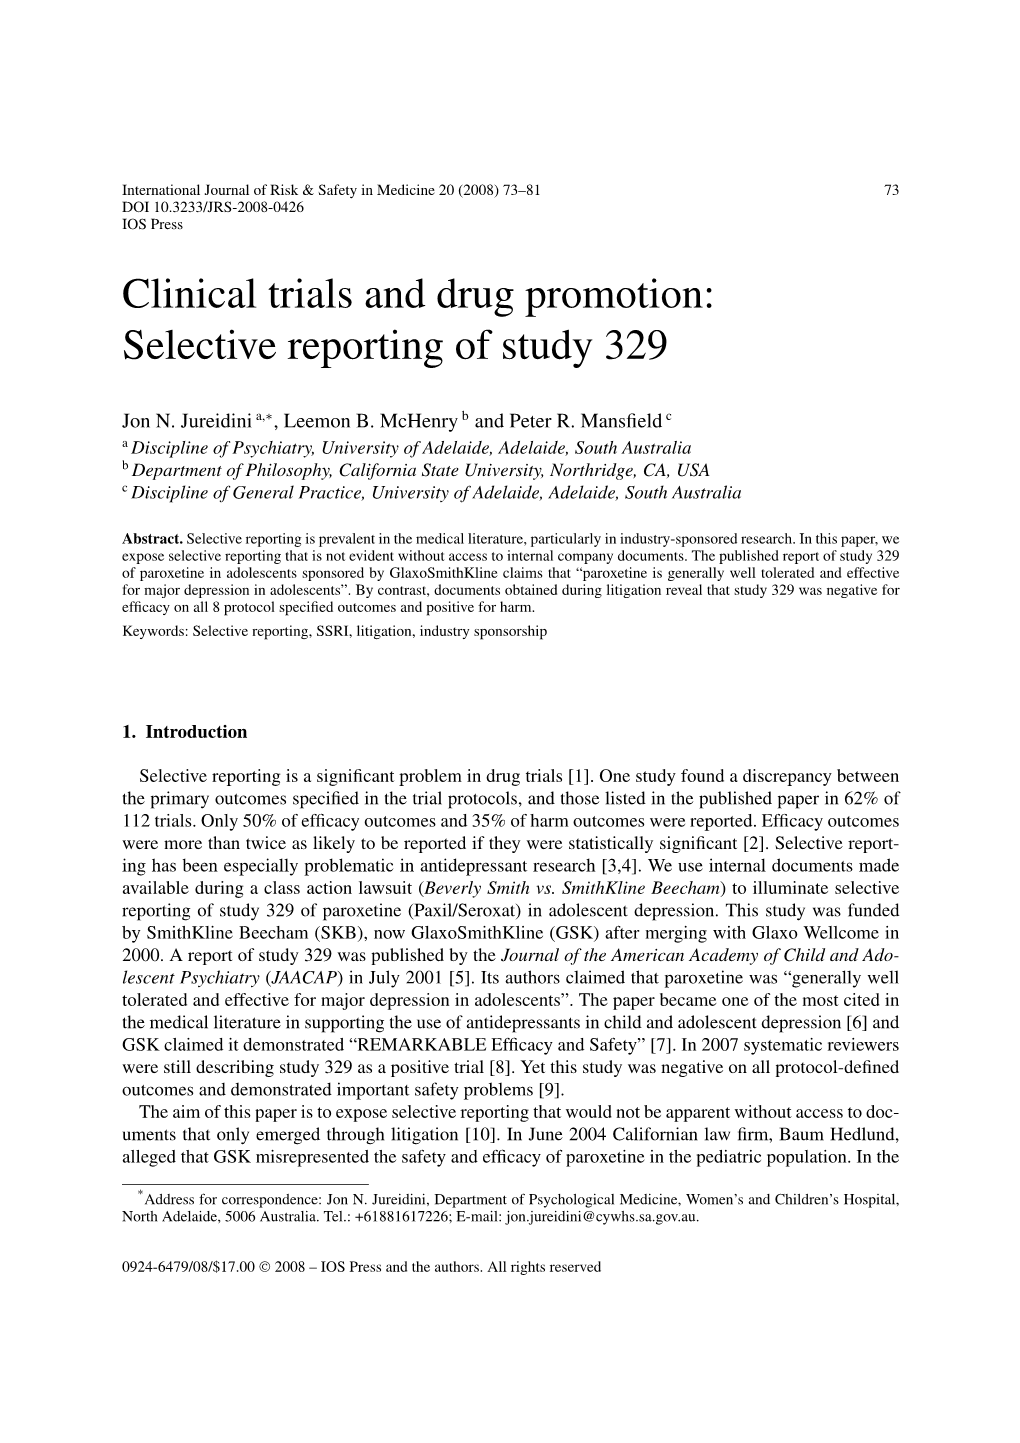 Clinical Trials and Drug Promotion: Selective Reporting of Study 329